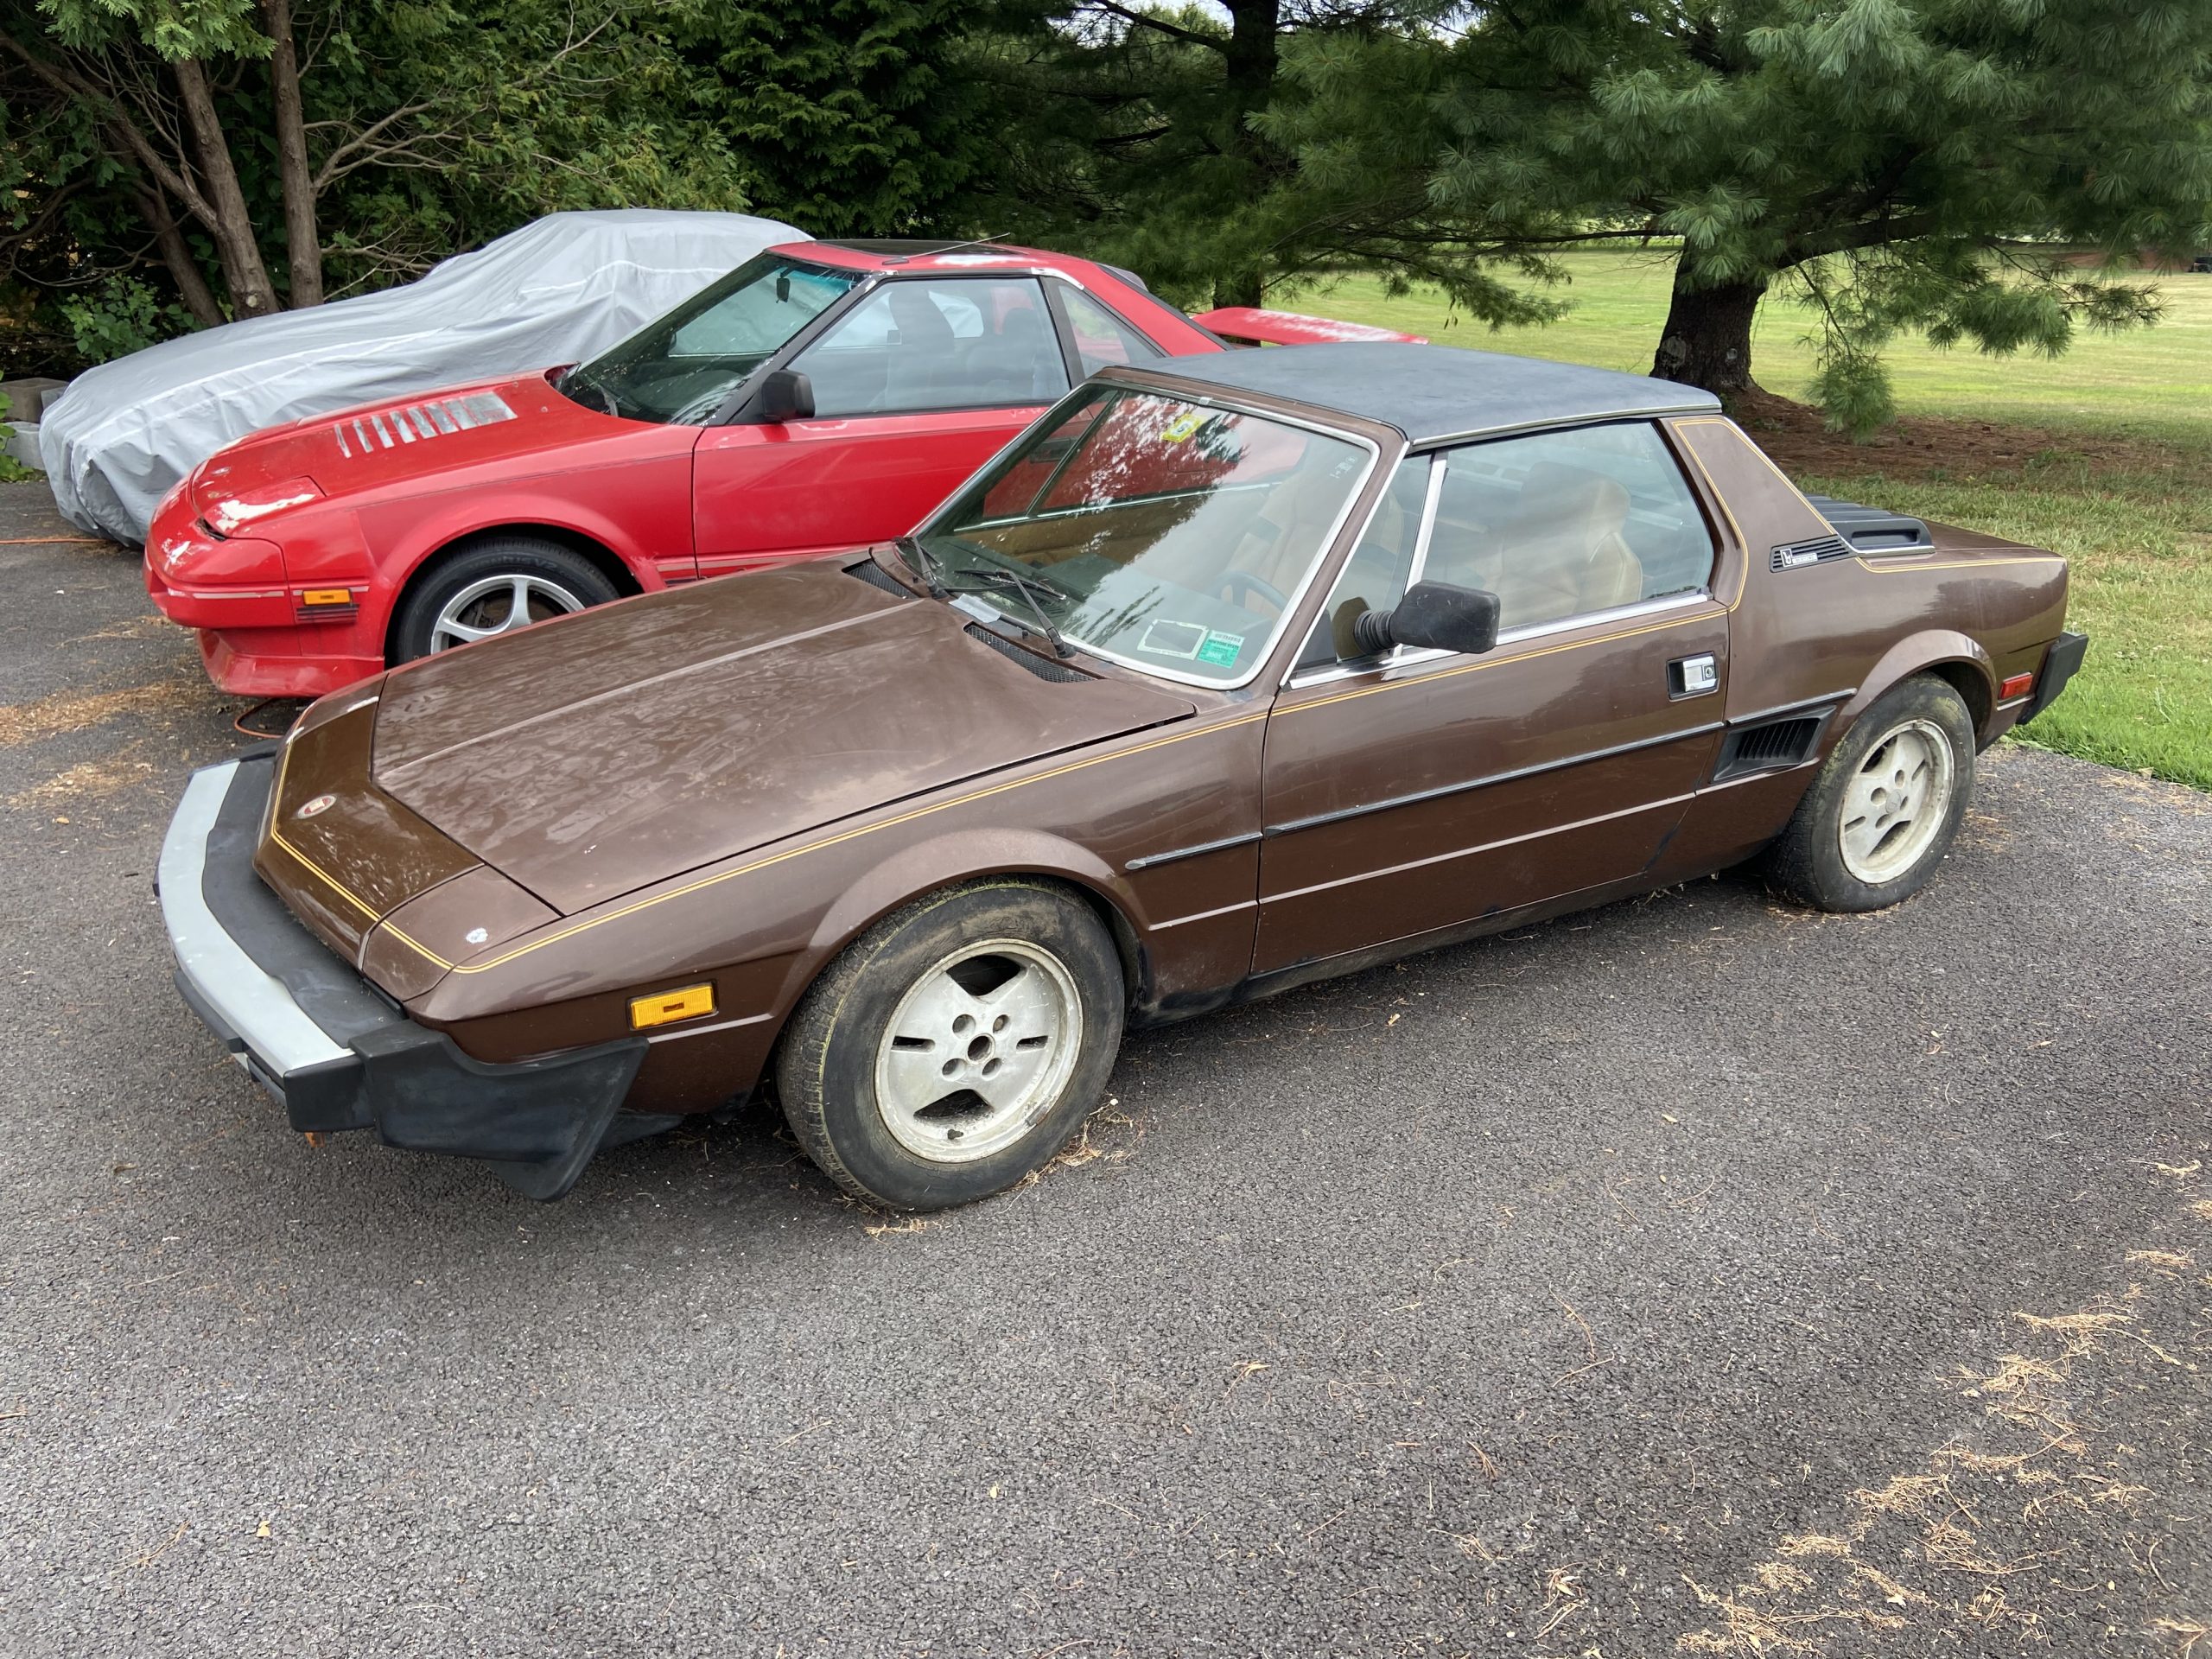 1980 Fiat X1/9 side view showing relatively rust free condition